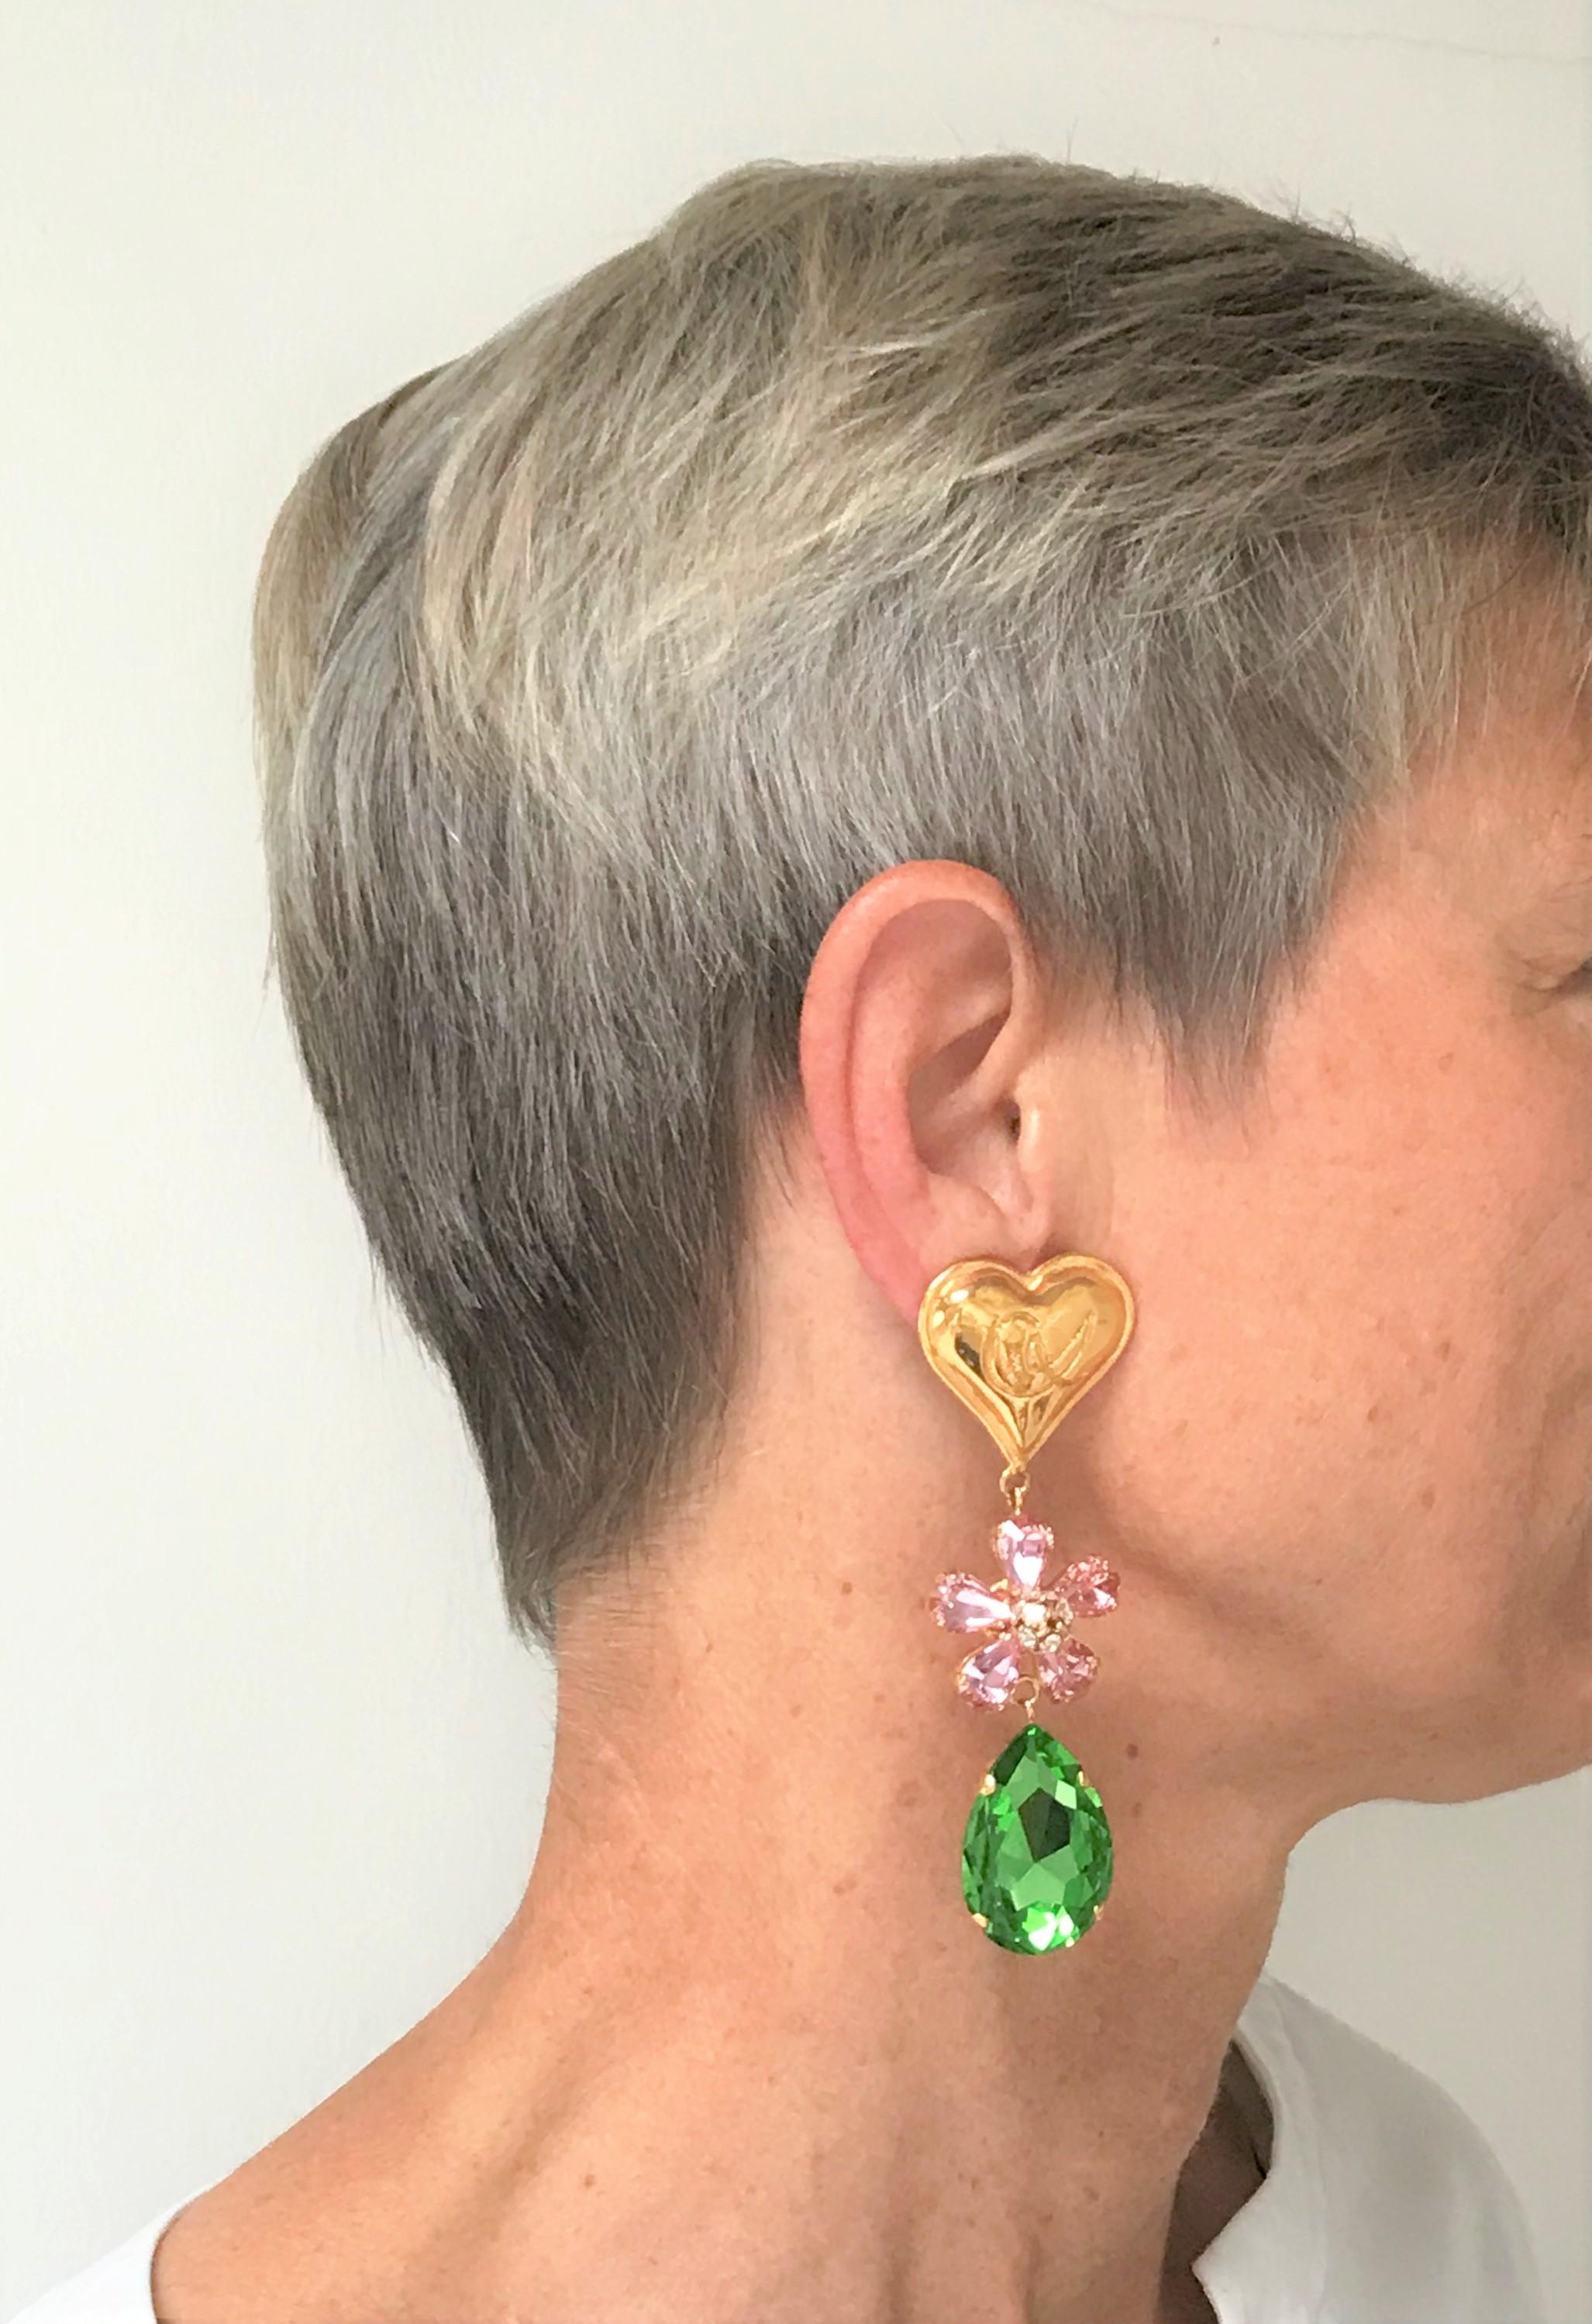 A beautiful ear clip from Christian Lacroix Paris. Consists of the famous Lacroix heart with a flower in rose rhinestones and a large green rhinestone dripping from it. A summer dream!
Measurement: Full length 9 cm/3.5